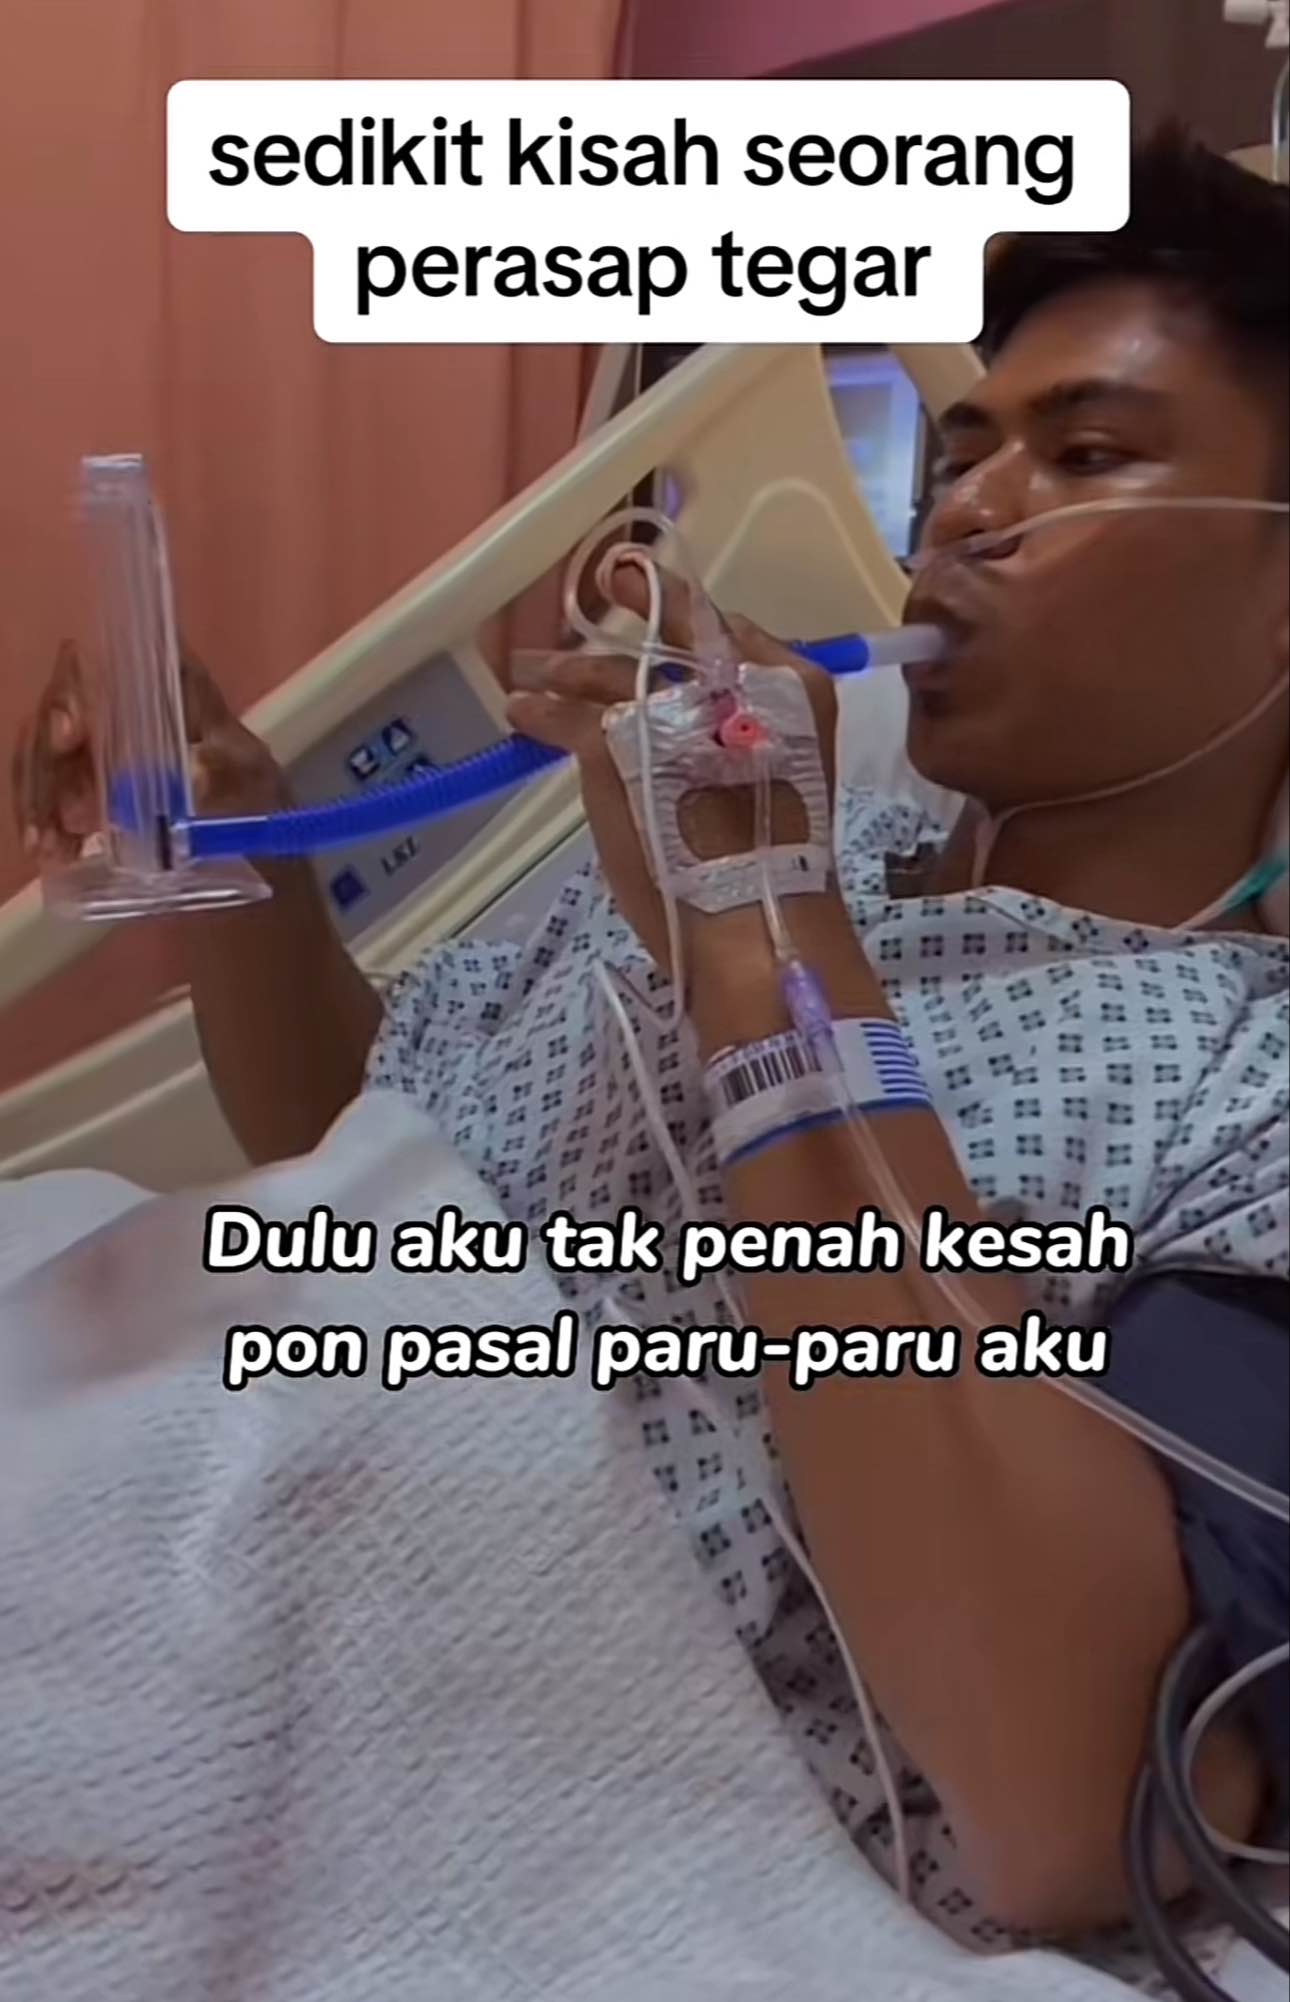 26yo m'sian lands himself in icu after lung collapses due to vaping, warns others not to follow